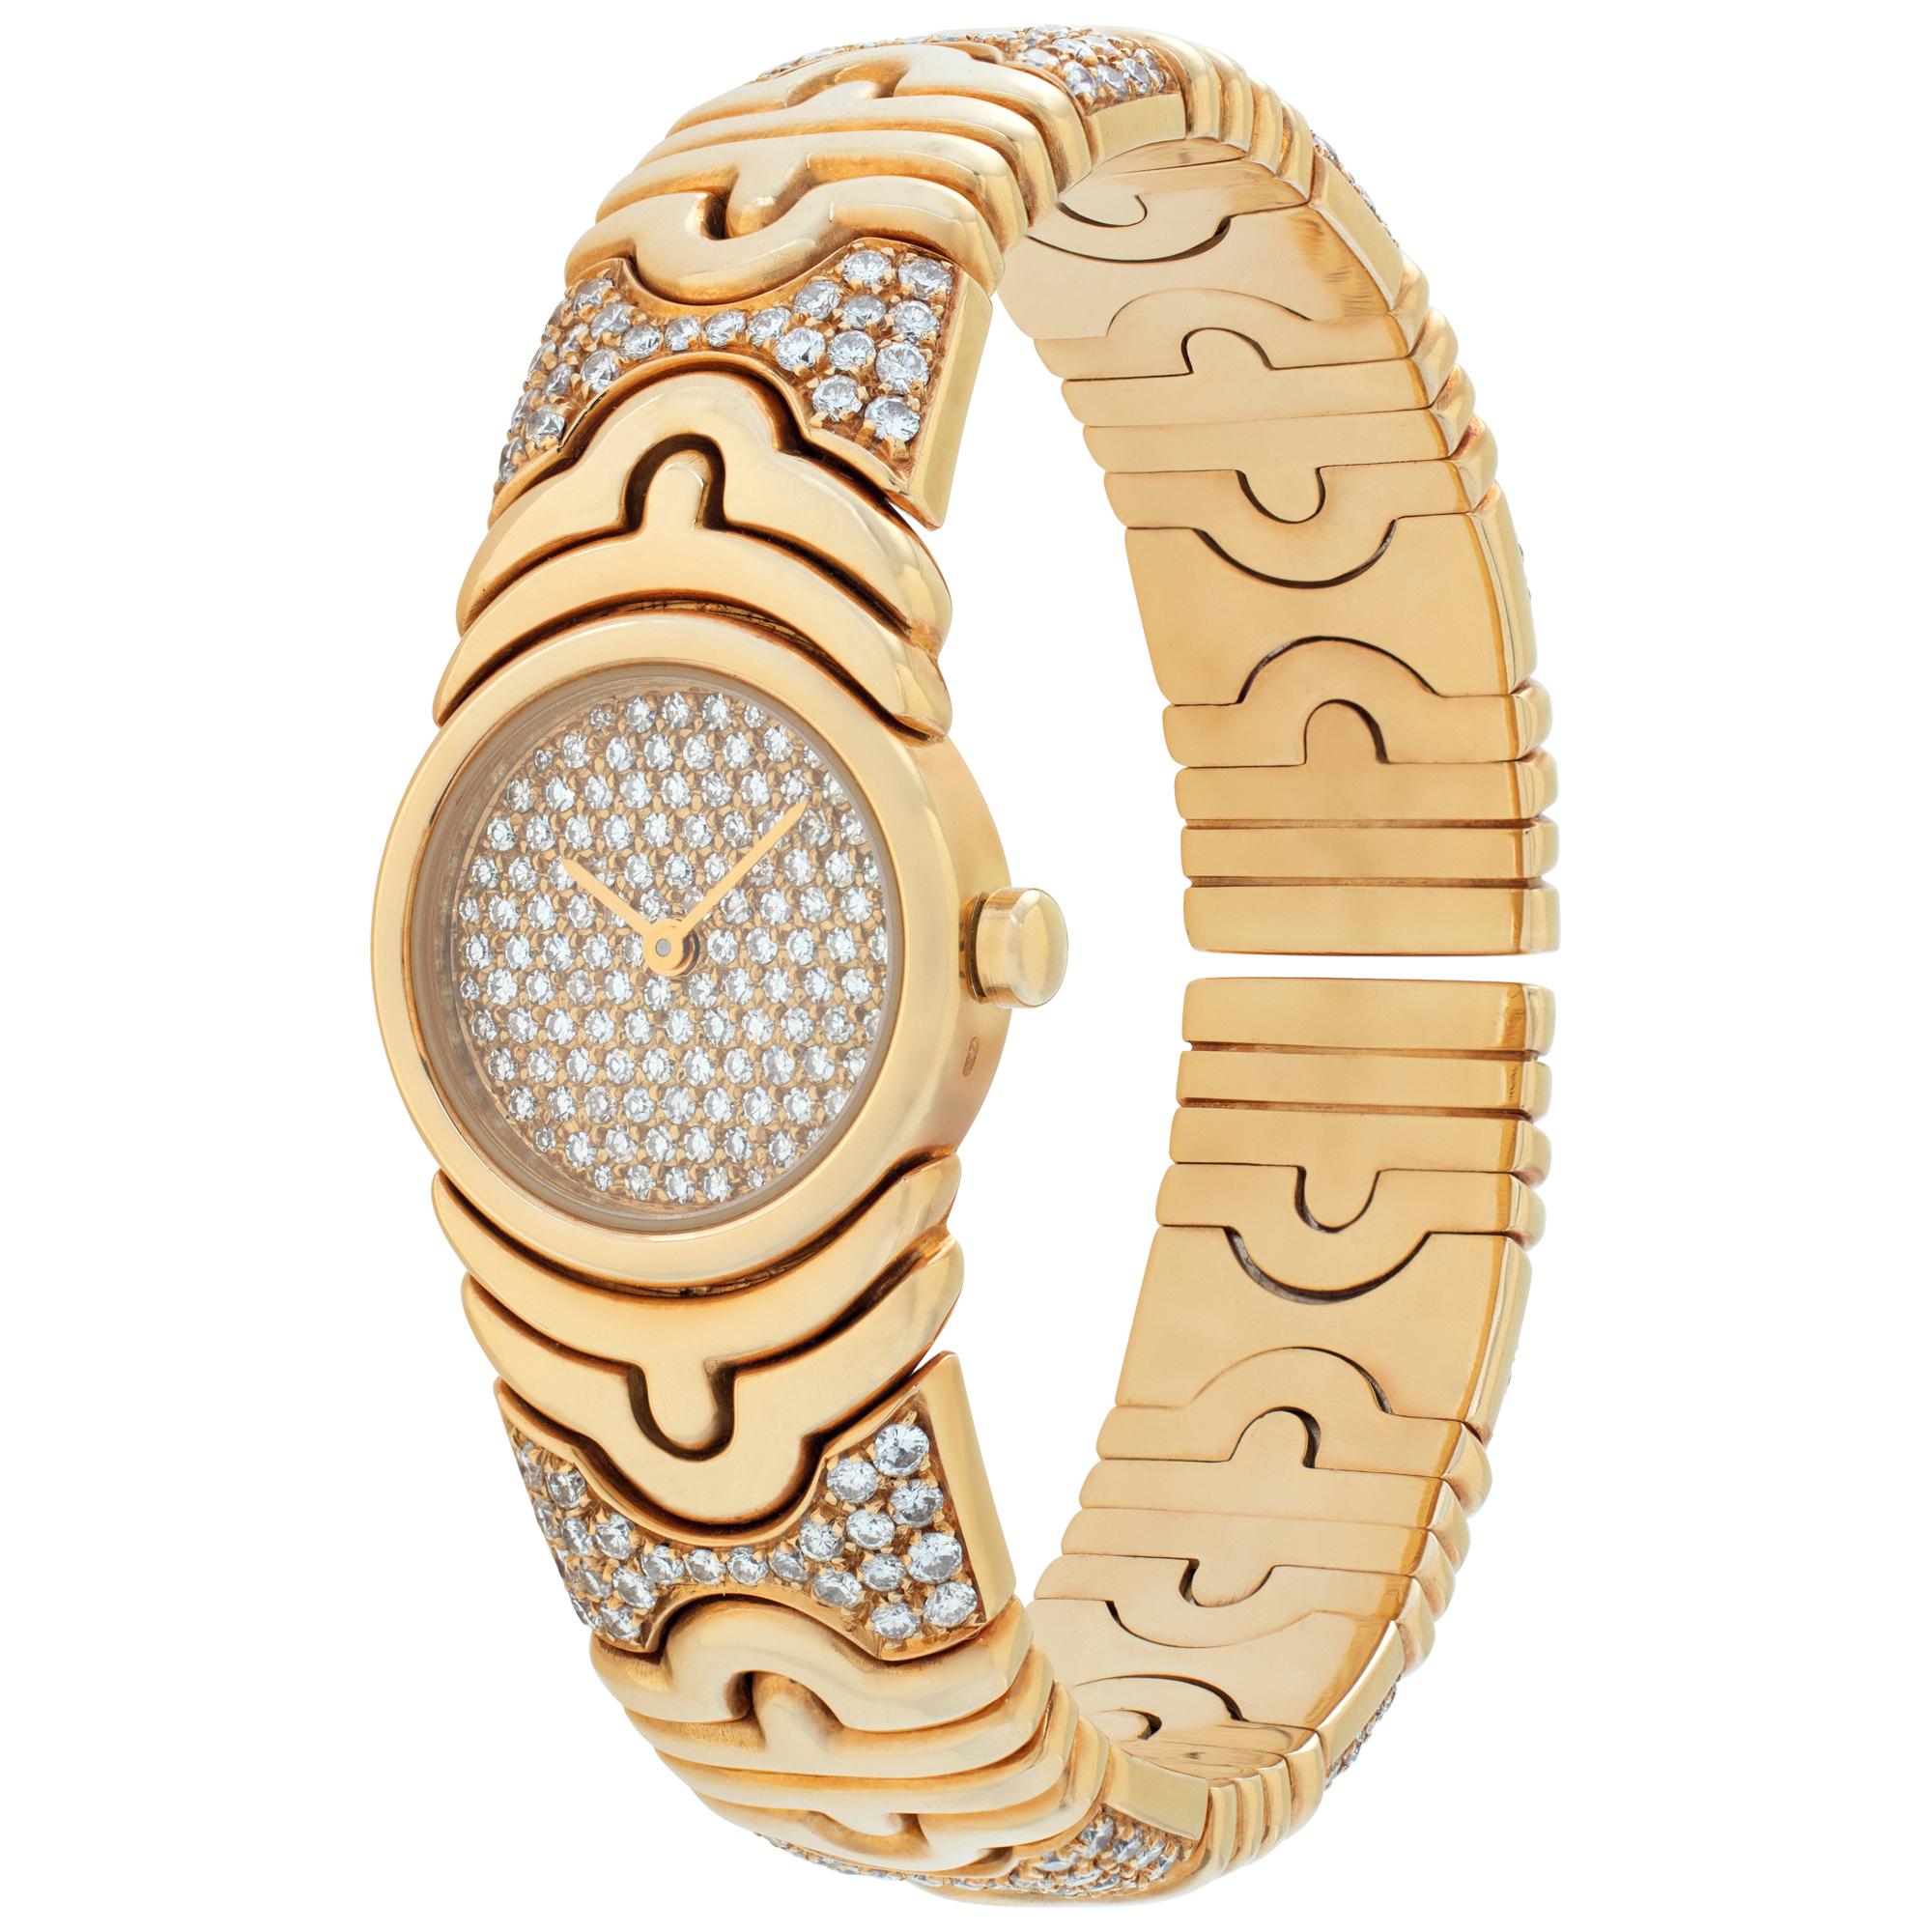 Bvlgari Parentesi watch in 18k yellow gold with pave diamond dial and pave diamond stations on bracelet. Quartz. 20 mm case size. Ref BJ 01. Circa 2000s. Fine Pre-owned Bvlgari / Bulgari Watch. Certified preowned Dress Bvlgari Parentesi BJ 01 watch